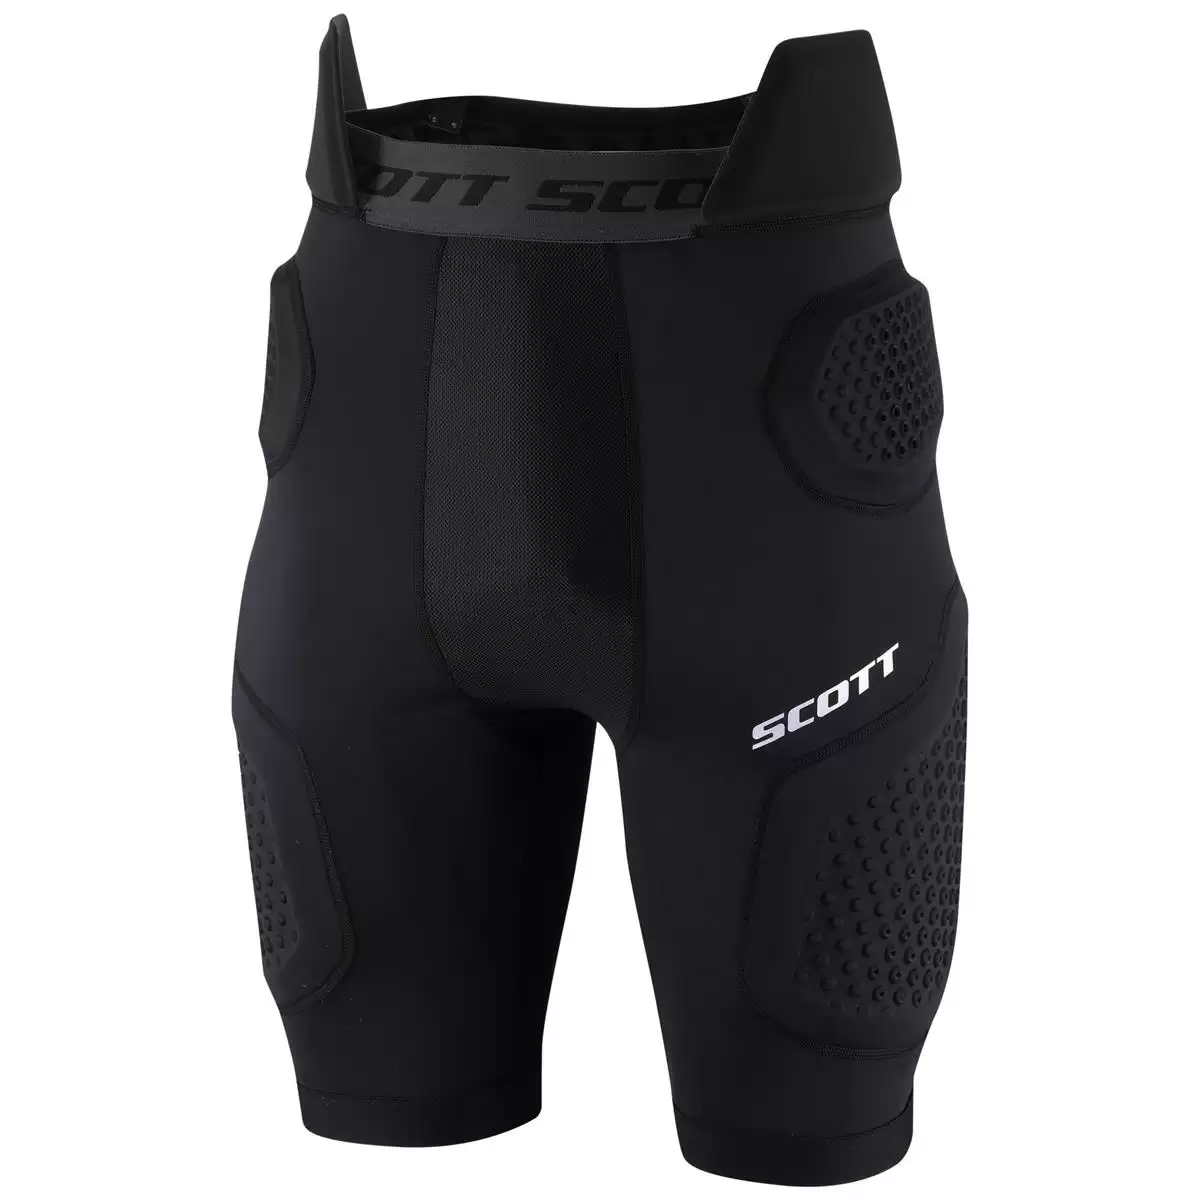 Short protector Softcon air black - Size L - image